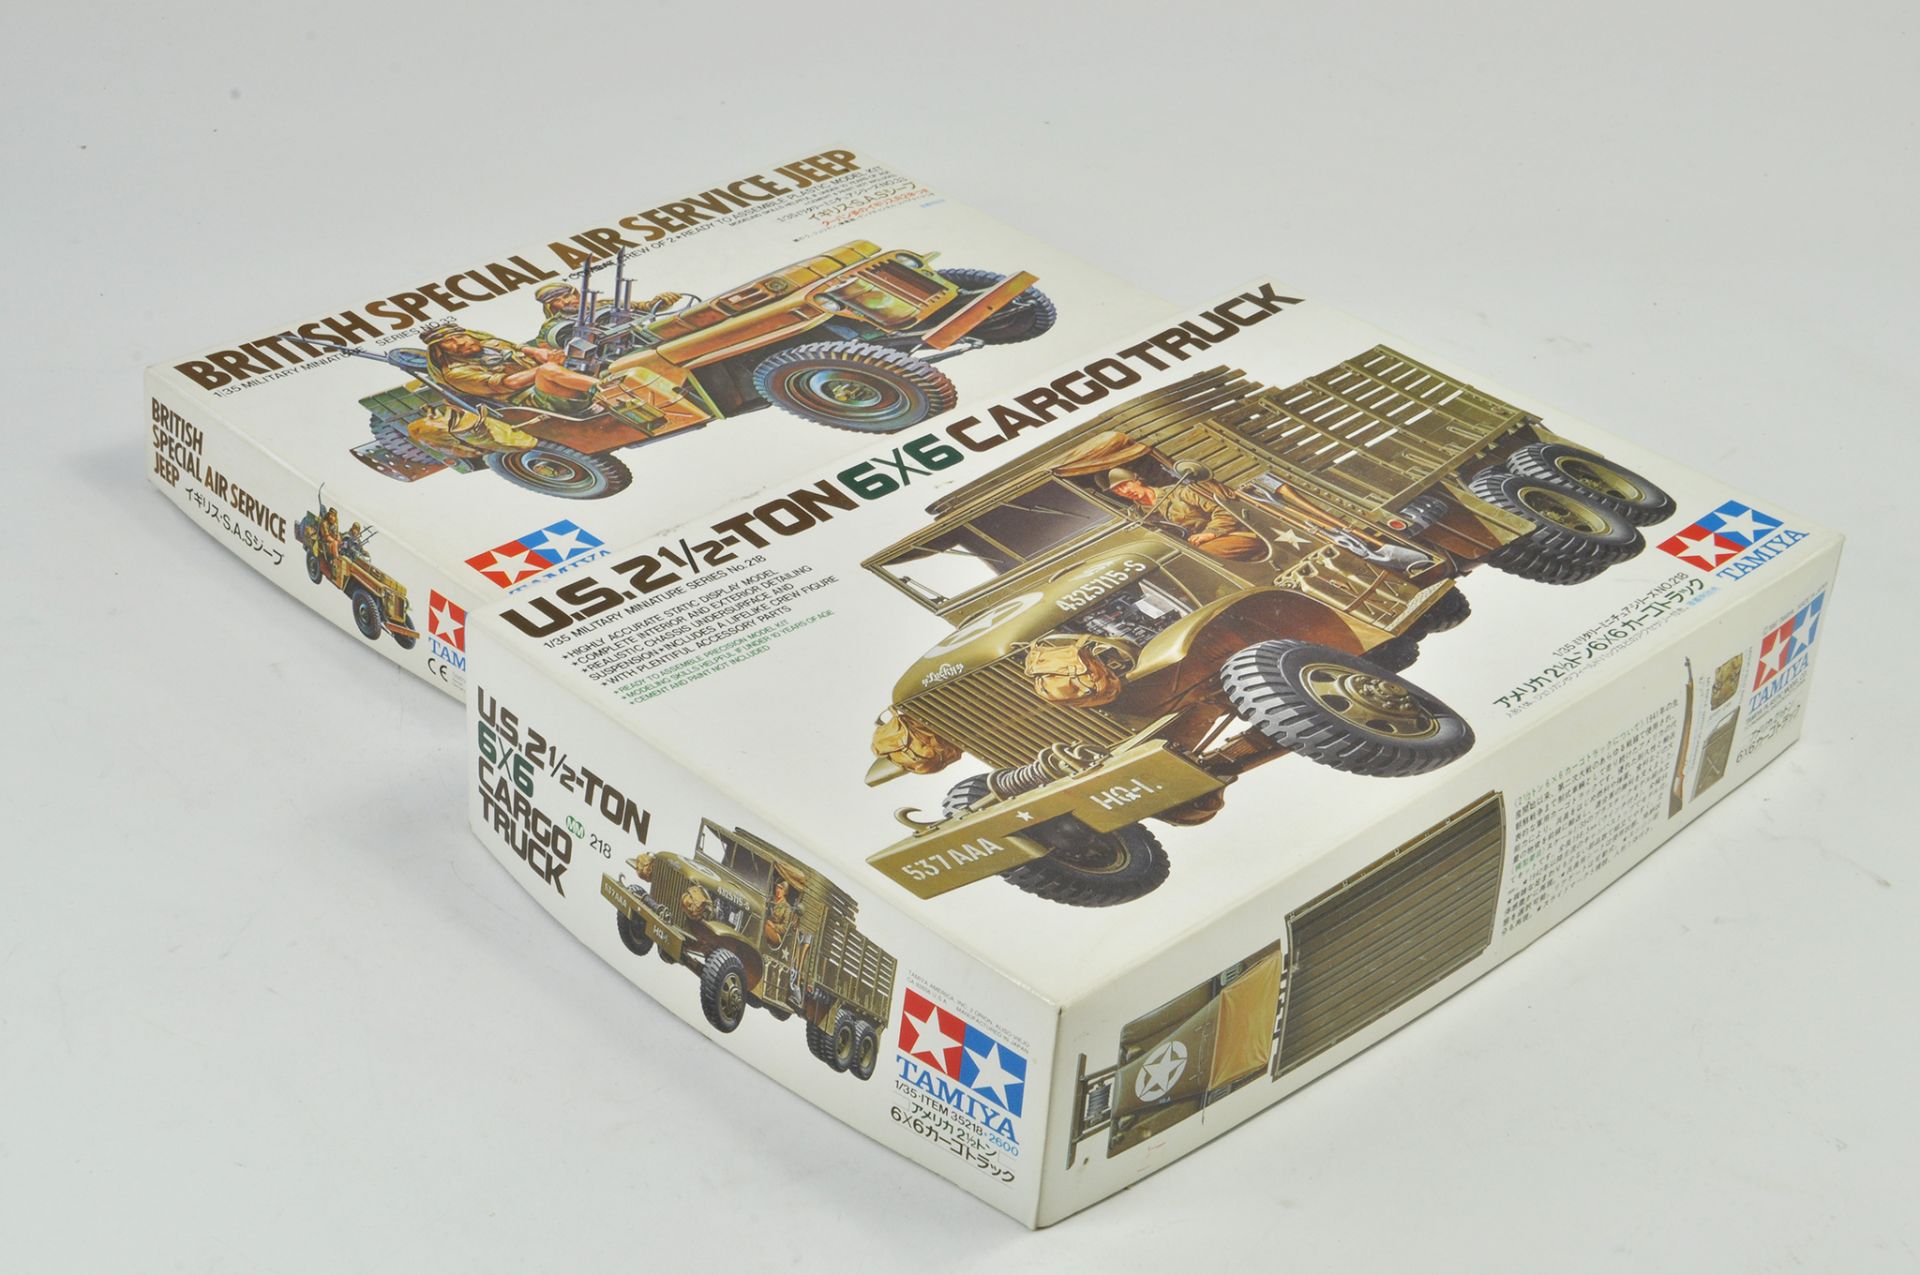 Duo of 1/35 Model Kits comprising British Special Air Service Jeep plus US 6x6 Cargo Truck. Both